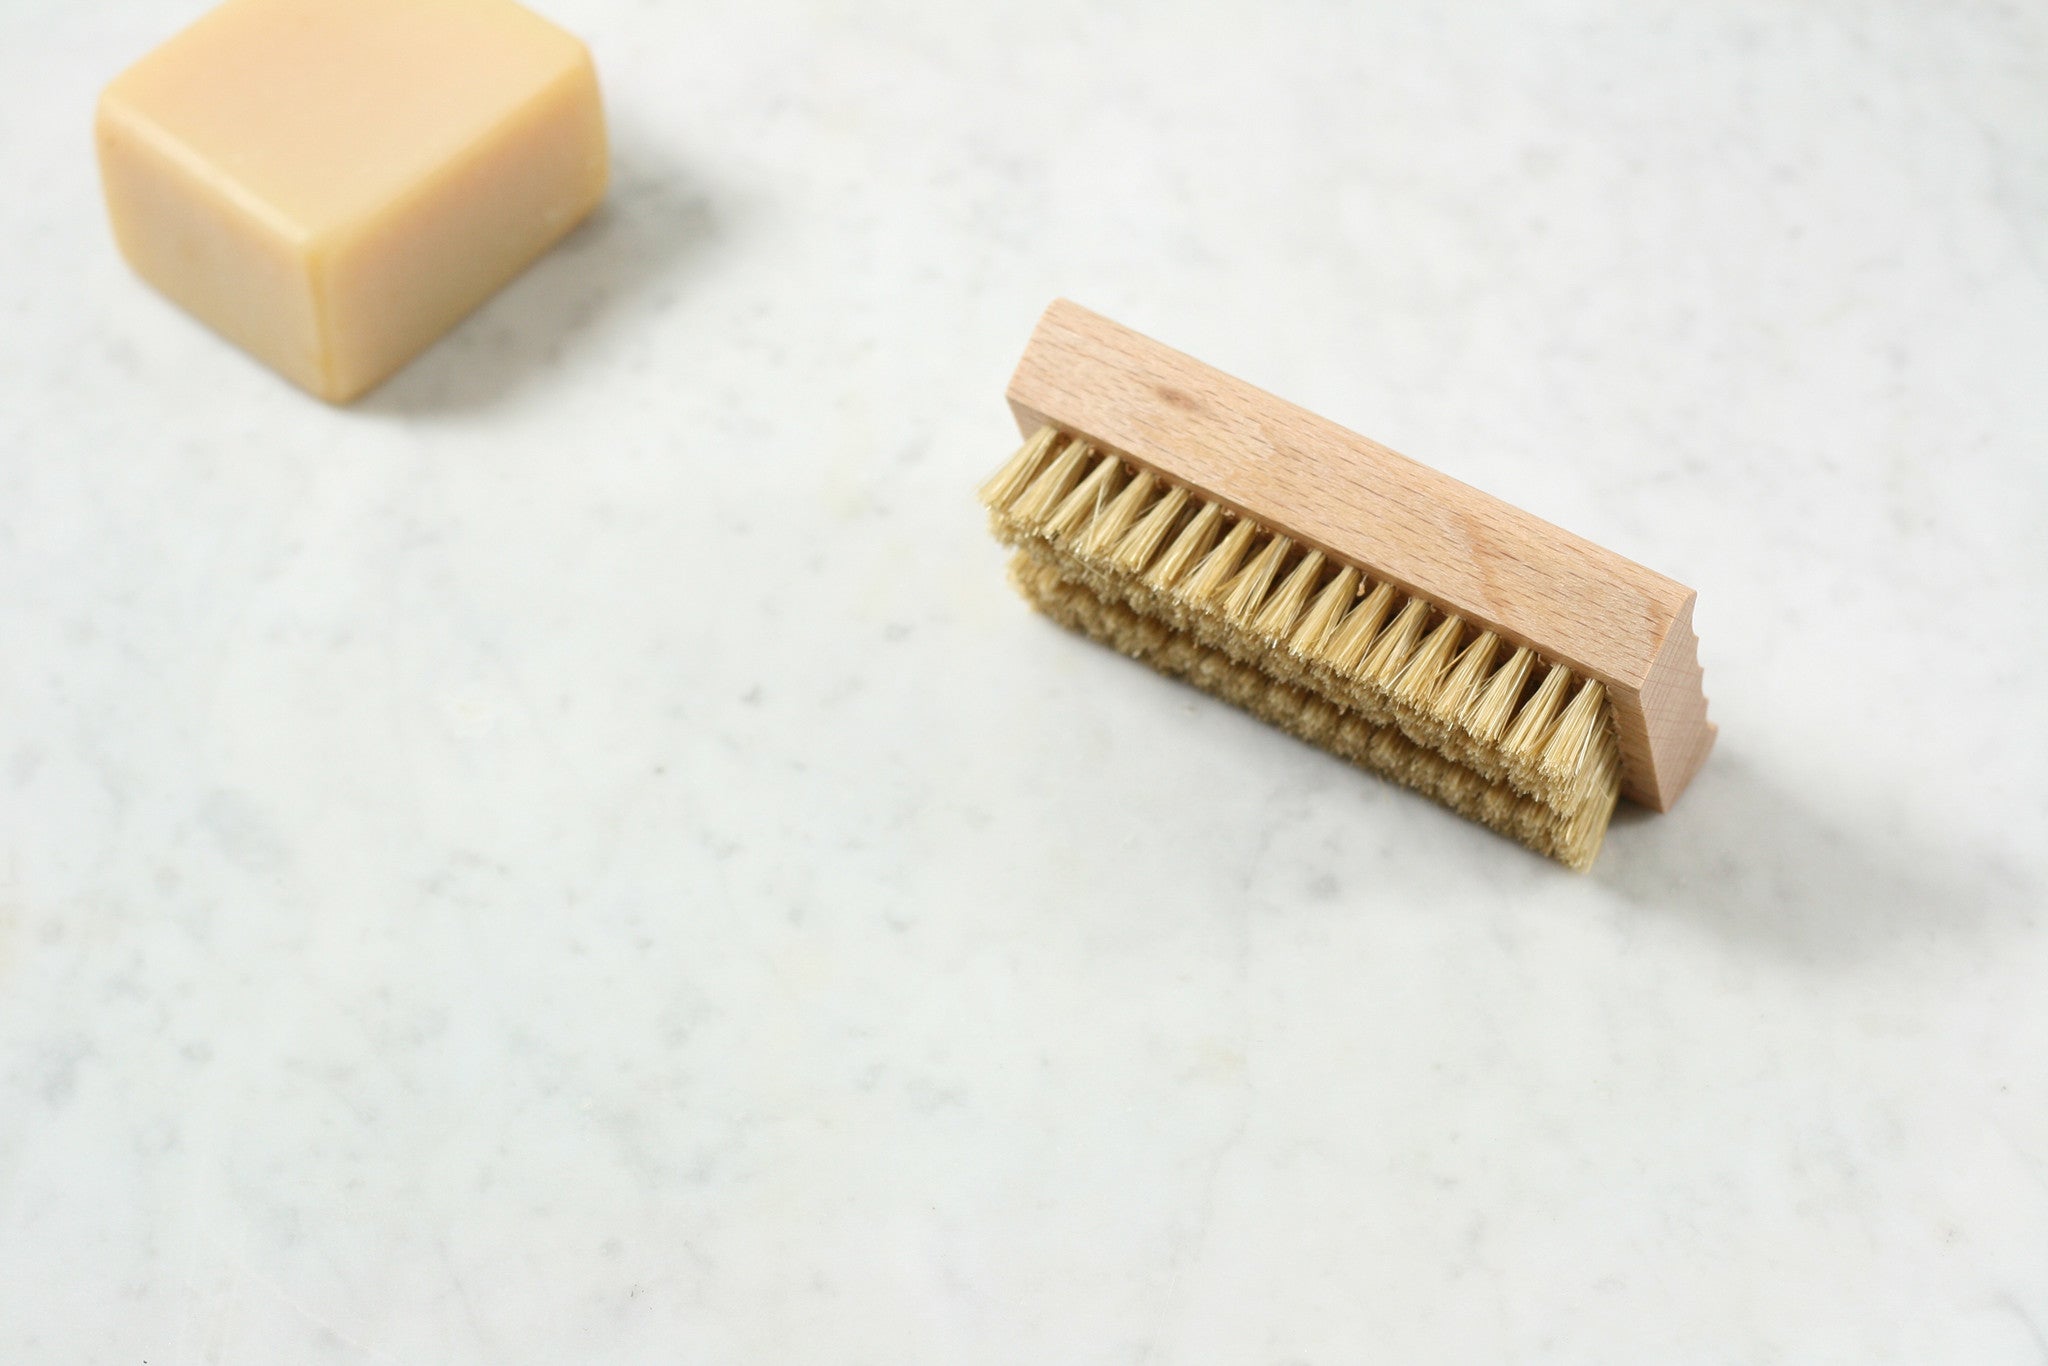 An oiled beechwood soap dish, with ridged surface, that does double duty as a nail brush. From Burstenhaus Redecker.